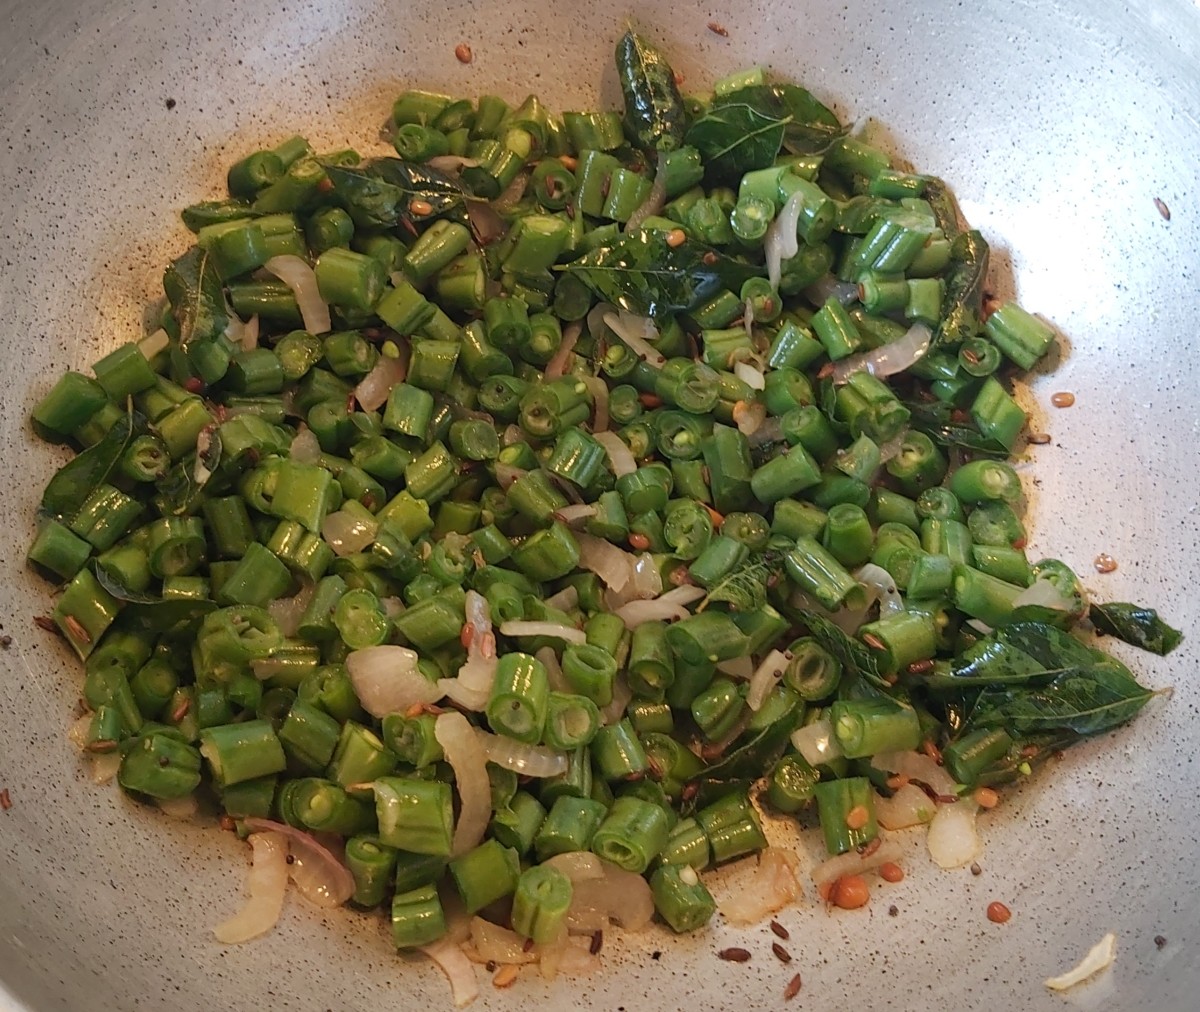 Mix well with seasoning and stir-fry for about 1-2 minutes over medium flame.